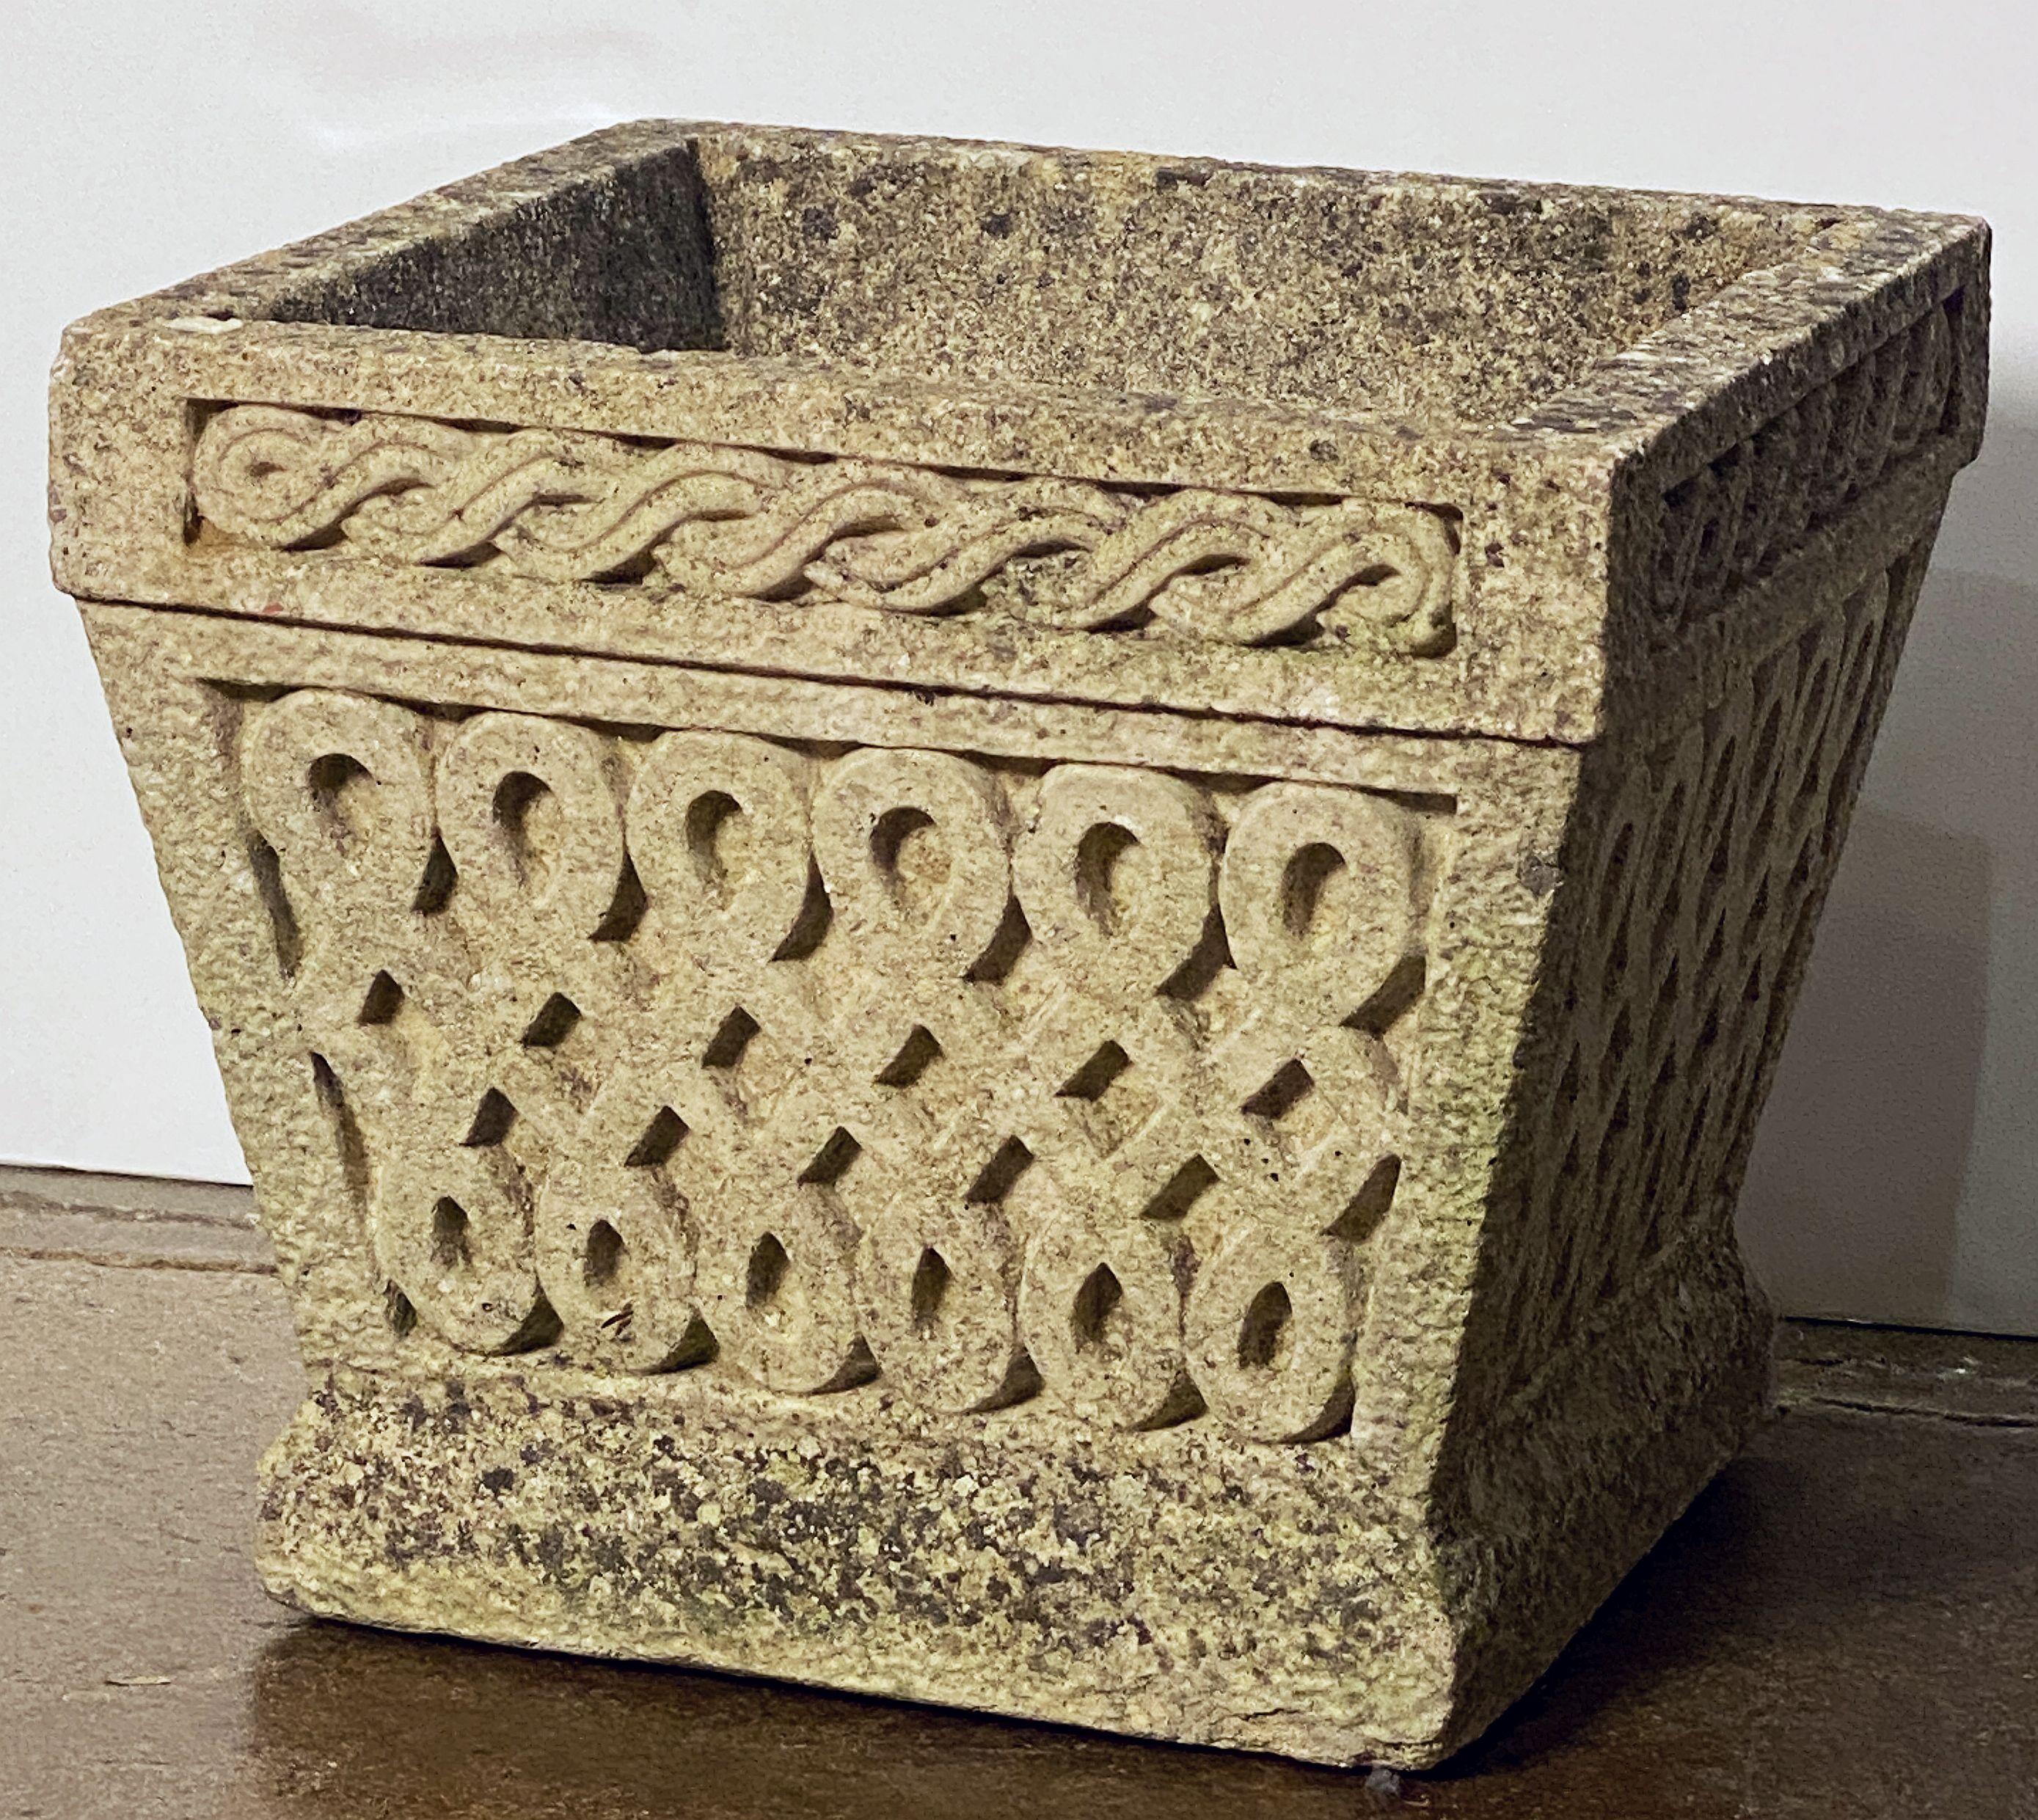 A fine pair of square garden planters or Cotswold Studios pots of composition stone - each featuring a Celtic knot or lattice decorative relief and original, naturally-weathered patina.

Two available - Individually priced - $2895 each planter.